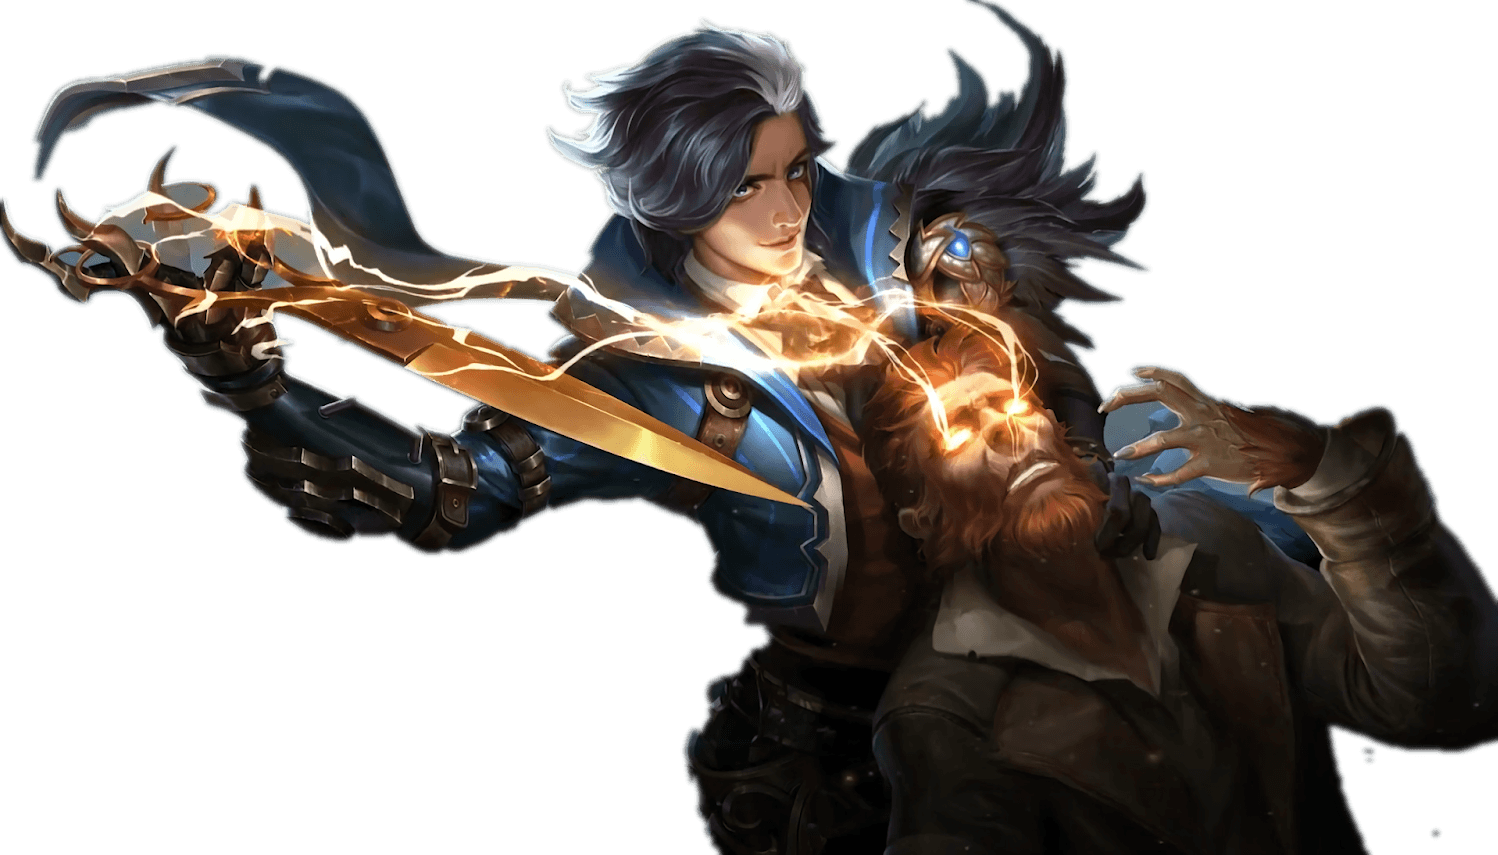 Mobile Legends Gusion Hairstylist Full HD Transparent Wallpaper